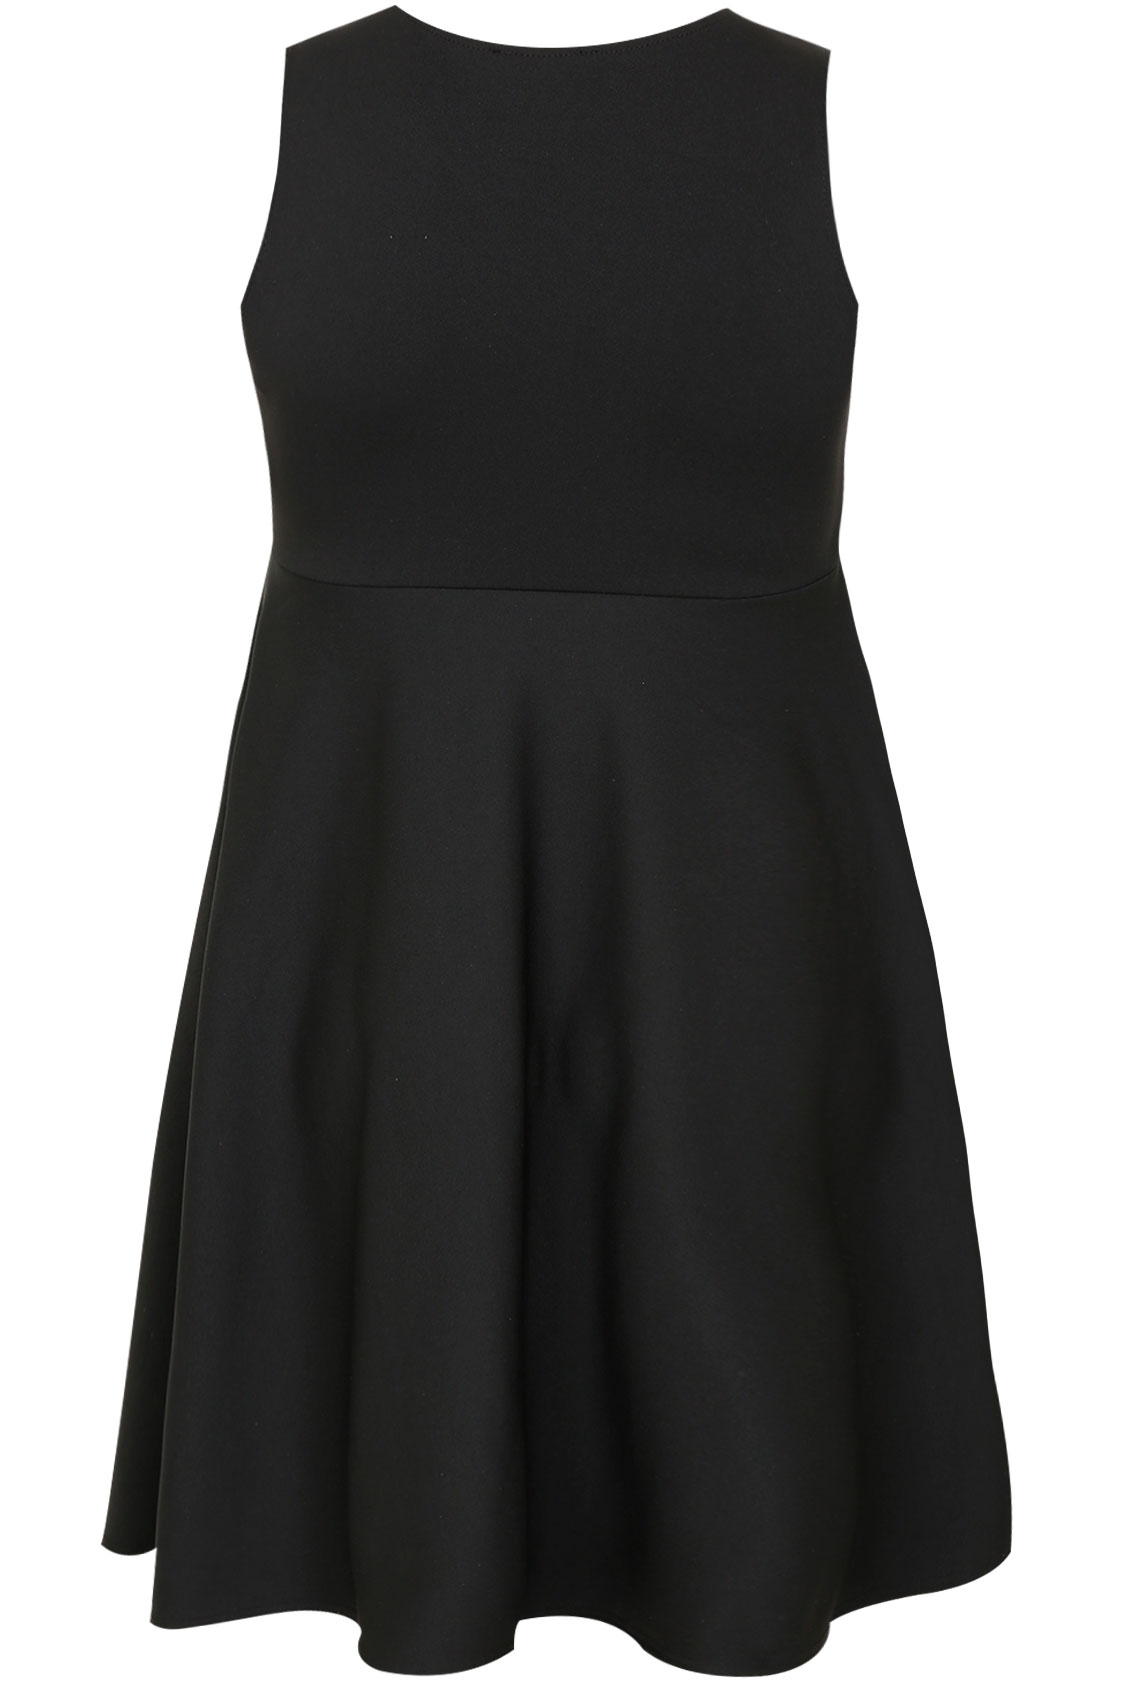 Black & Nude Panel Skater Dress With Glitter & Lace Detail, Plus size ...